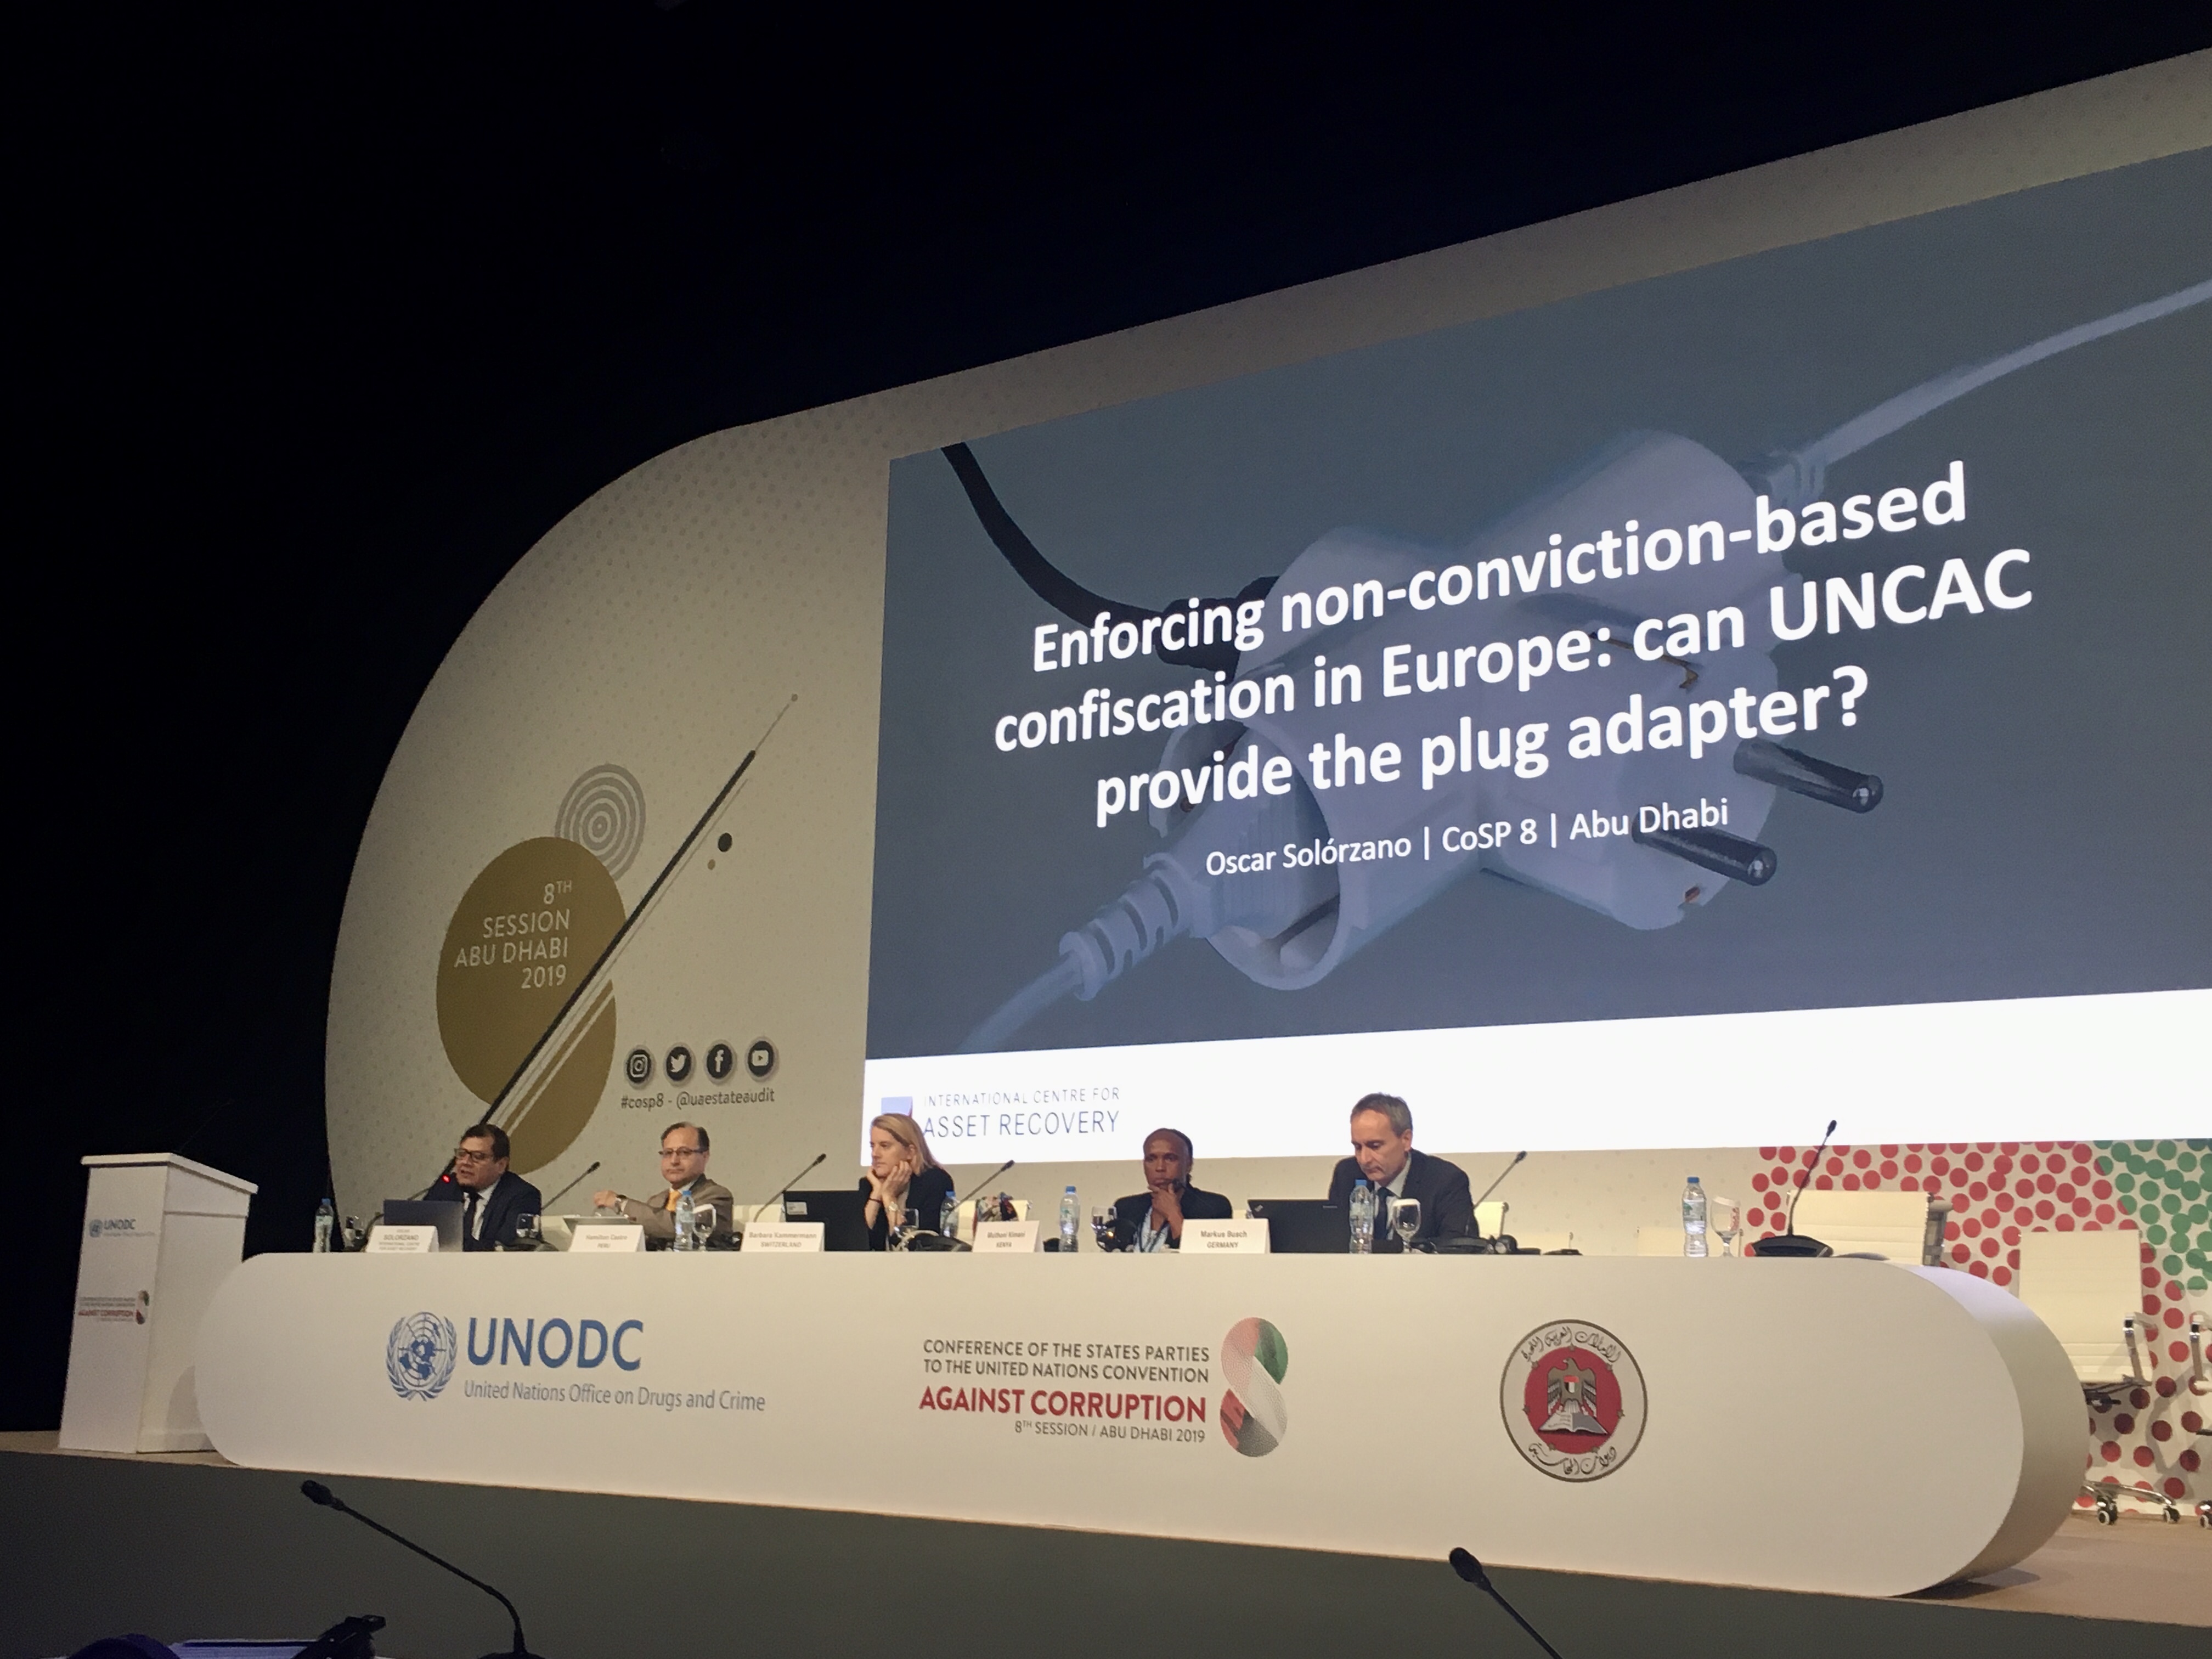 CoSP panel on asset recovery